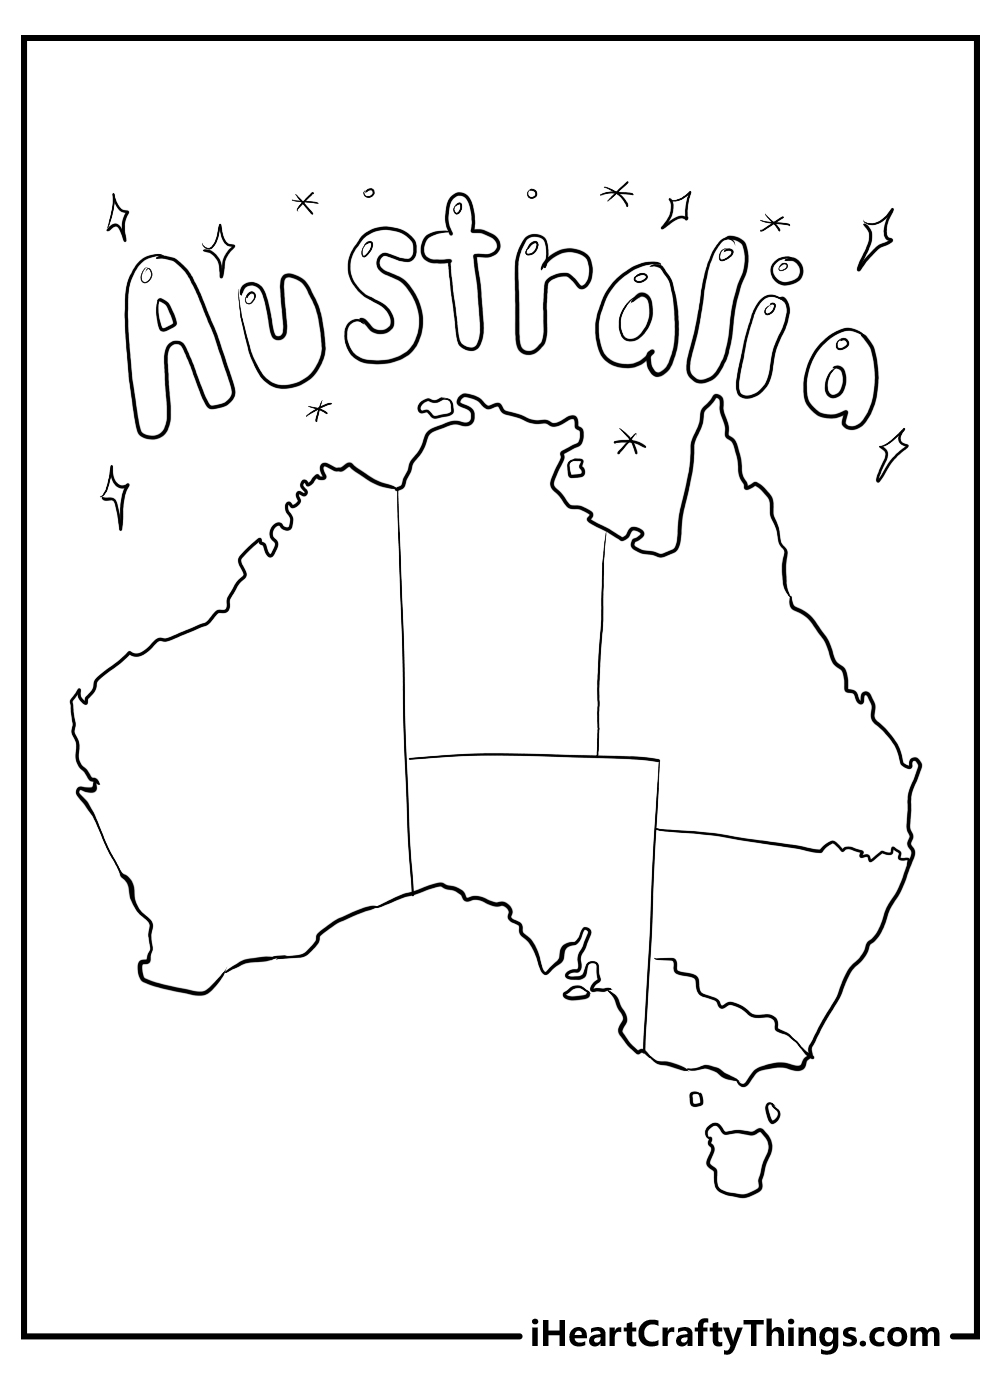 world map continents coloring page